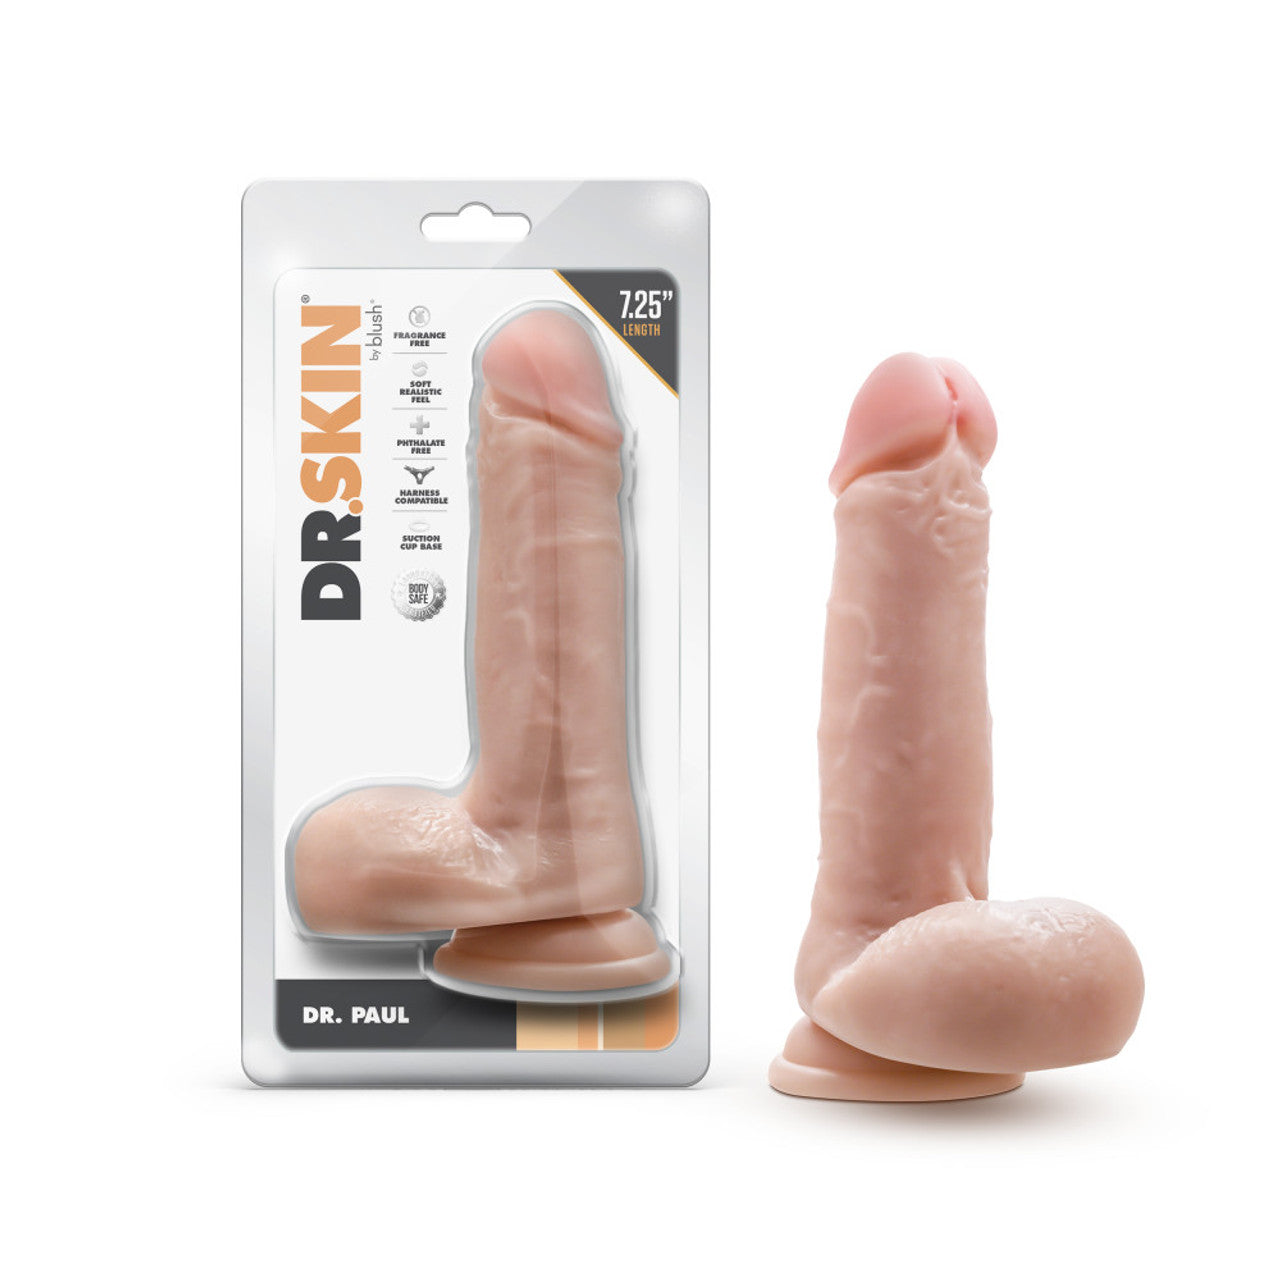 Dr. Skin 7.25 Inch Dildo With Balls - Beige - Thorn & Feather